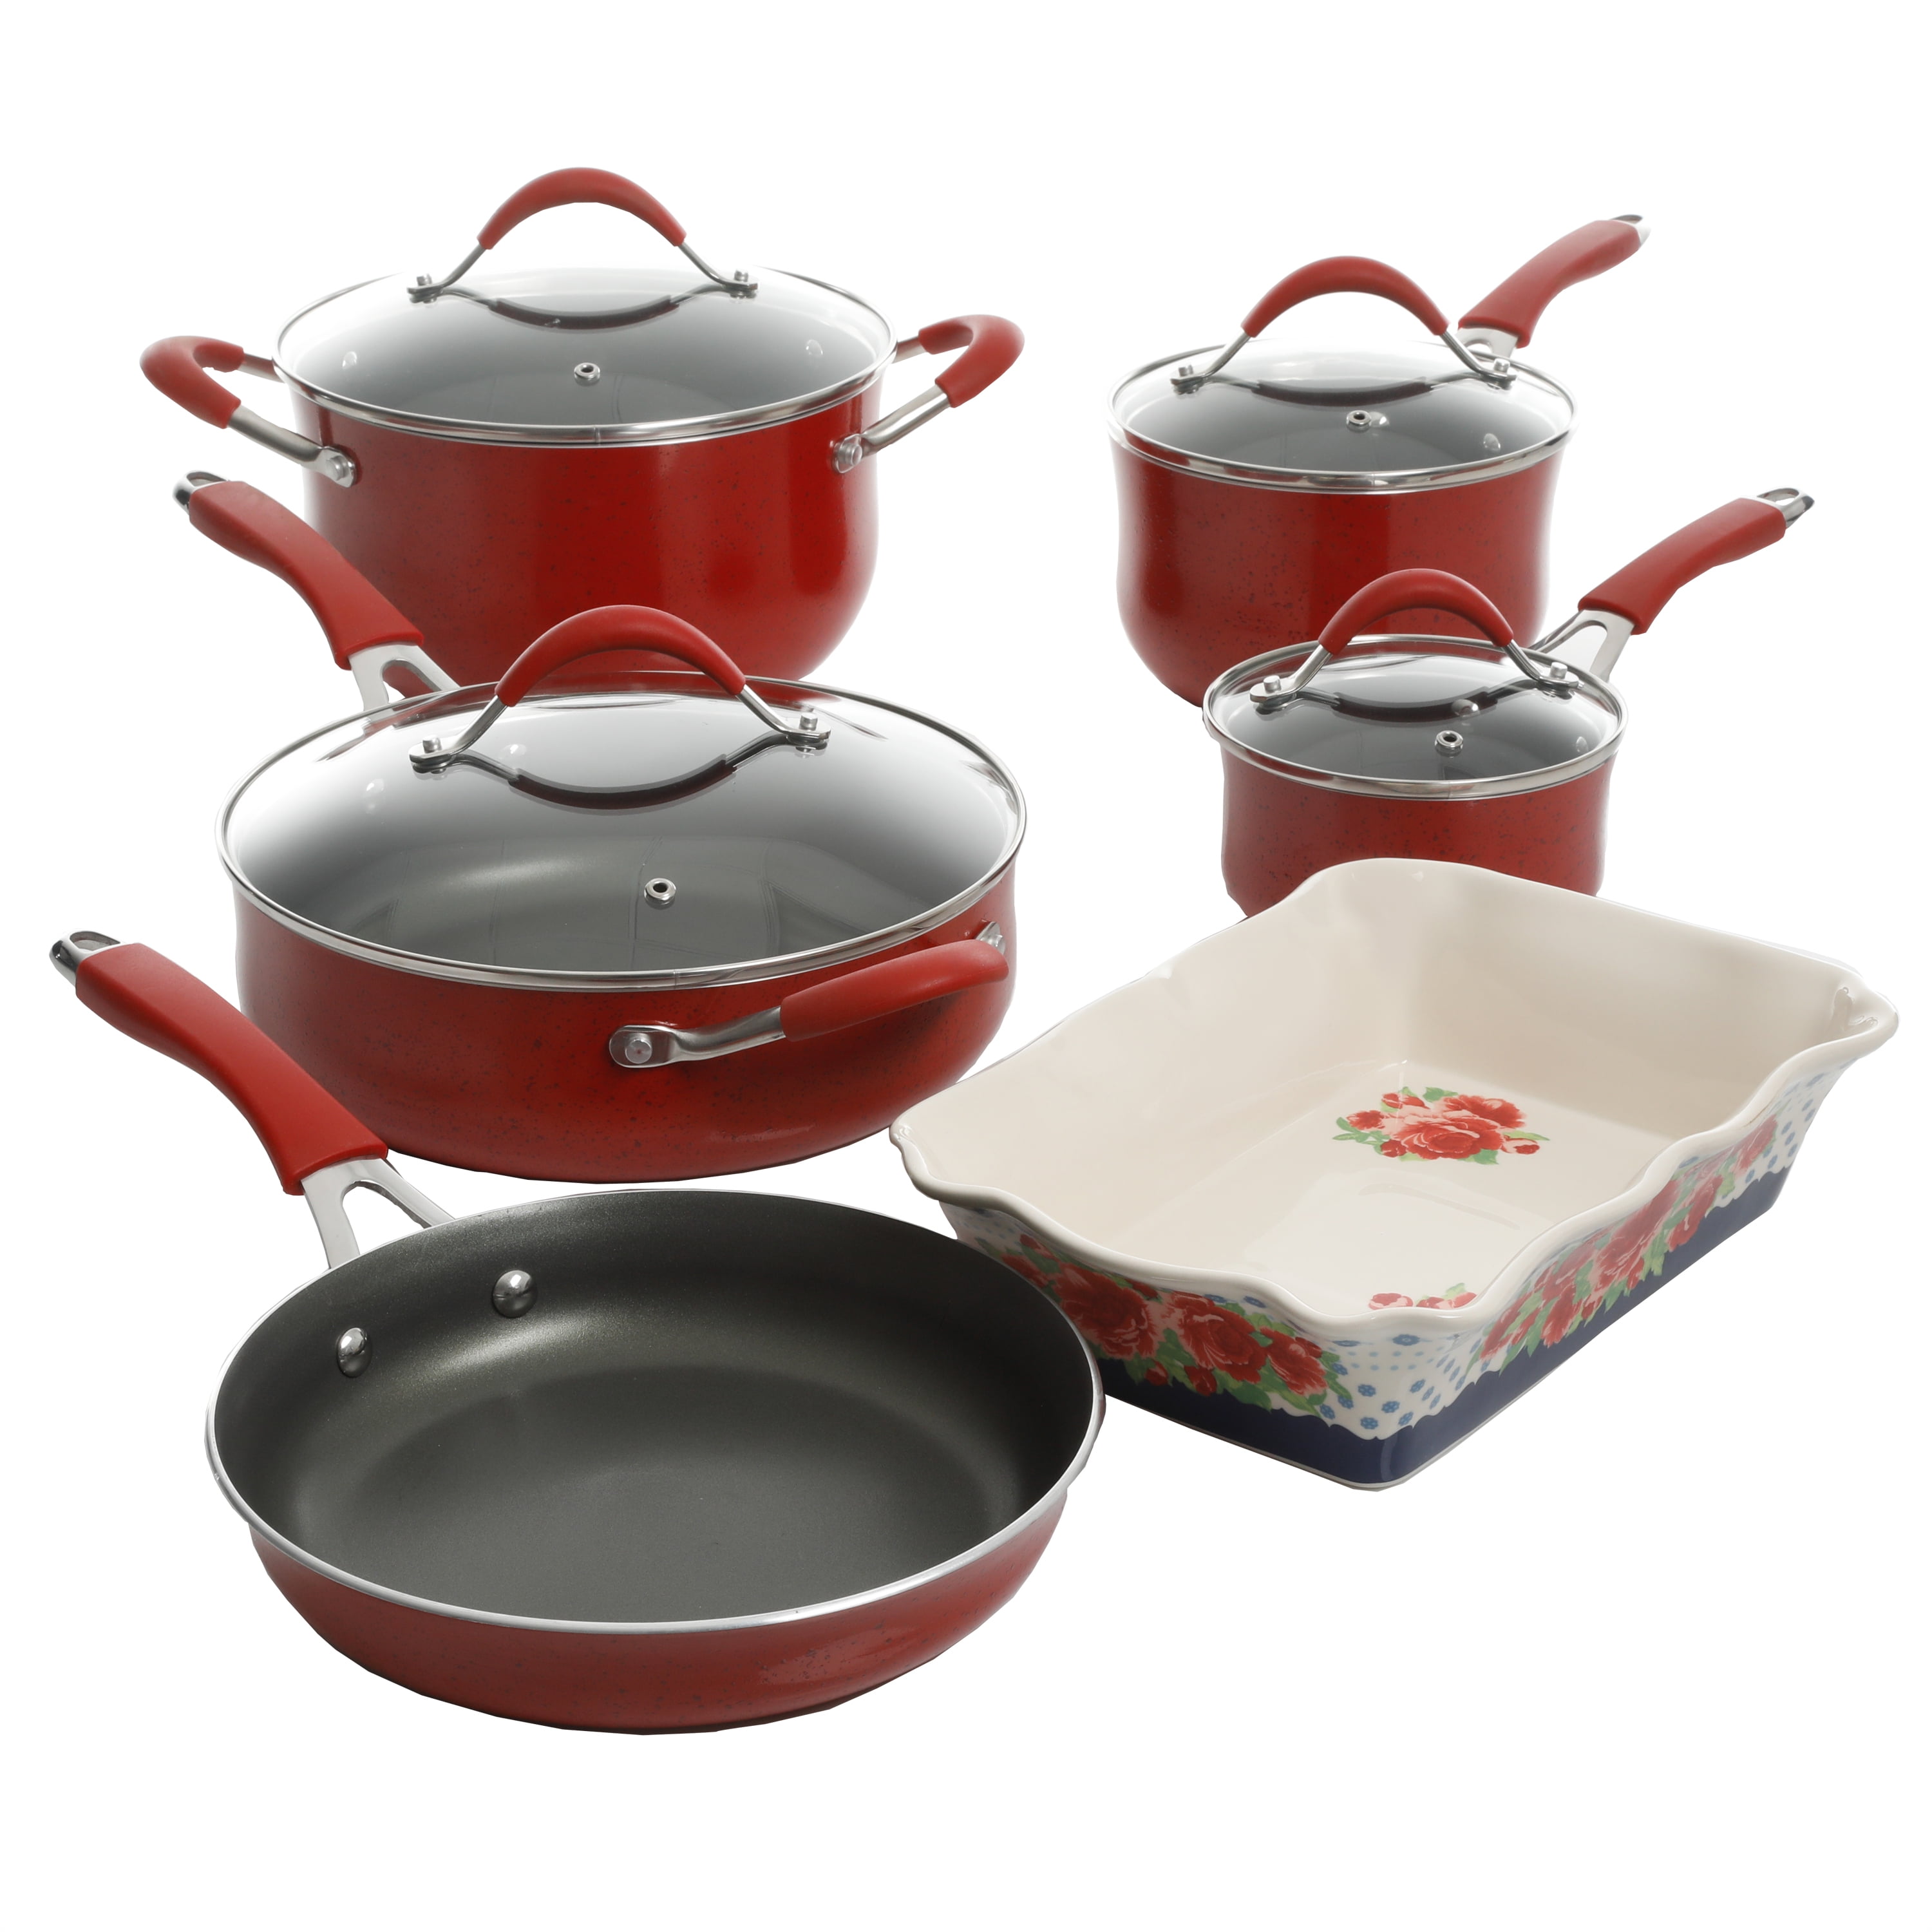 pioneer woman cookware products #pioneer #woman #cookware #products  #pioneerwomancookwarep…